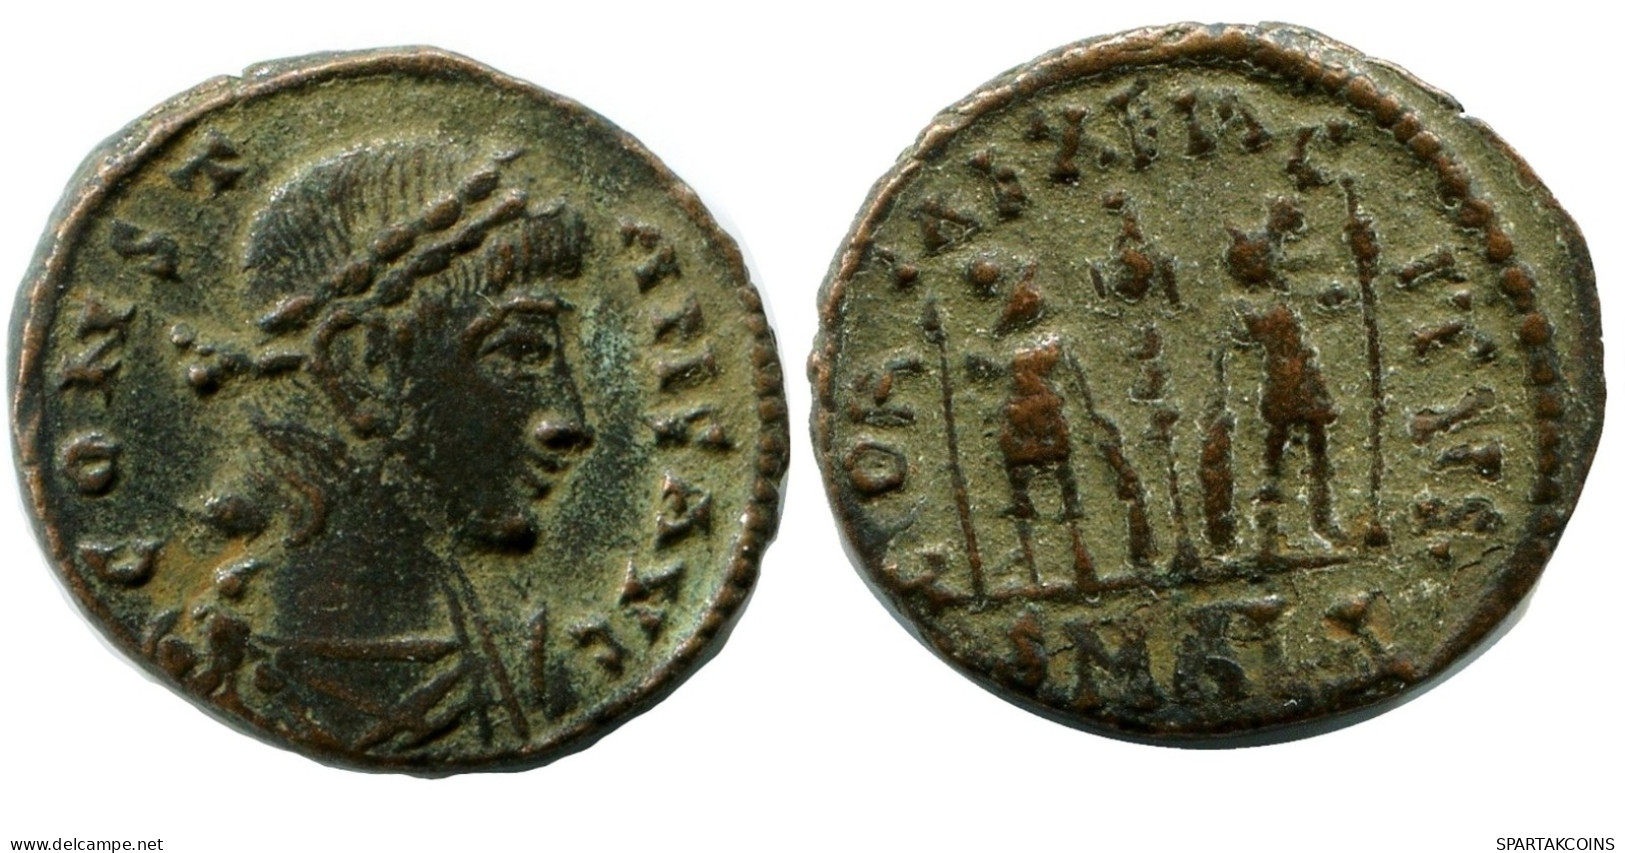 CONSTANS MINTED IN ALEKSANDRIA FROM THE ROYAL ONTARIO MUSEUM #ANC11359.14.U.A - L'Empire Chrétien (307 à 363)